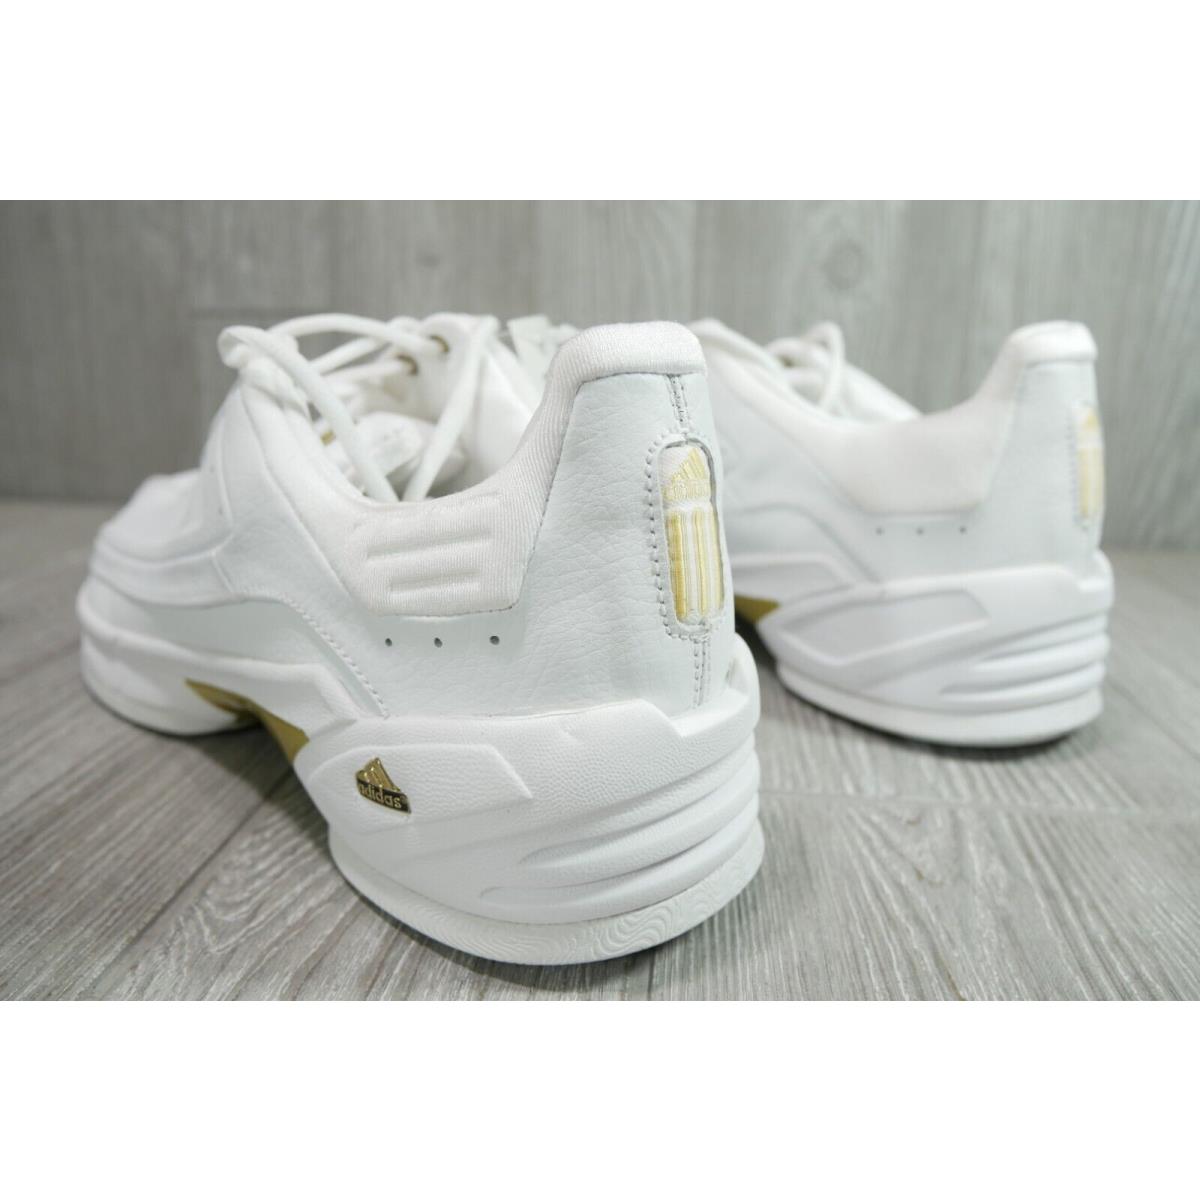 Adidas shoes Trainer - White 3